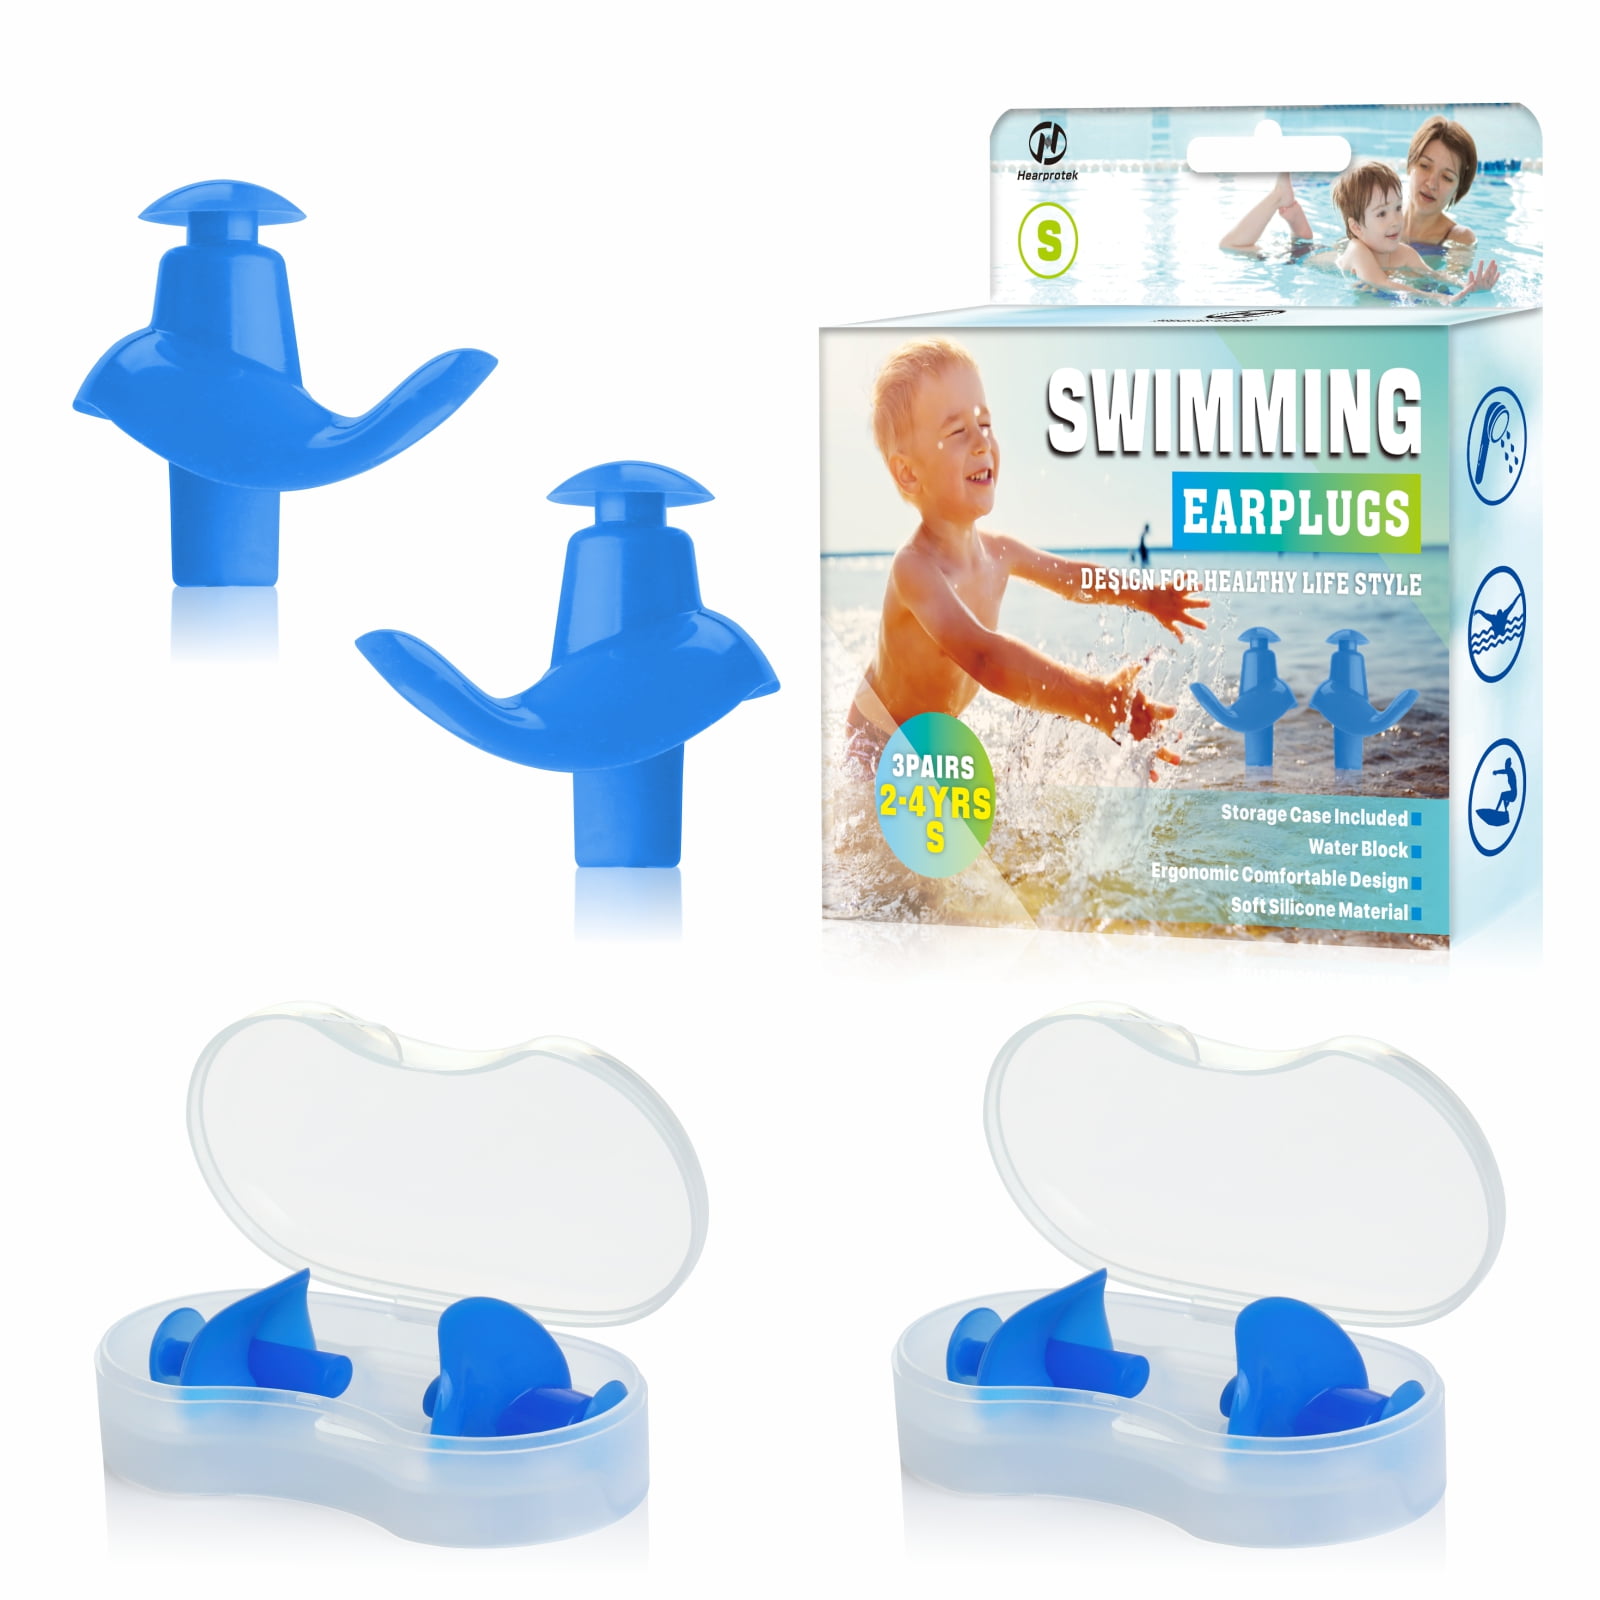 Swimming Earplugs Earbuds Ear Plugs For Kids For Swimming 5 Pairs New Durable 